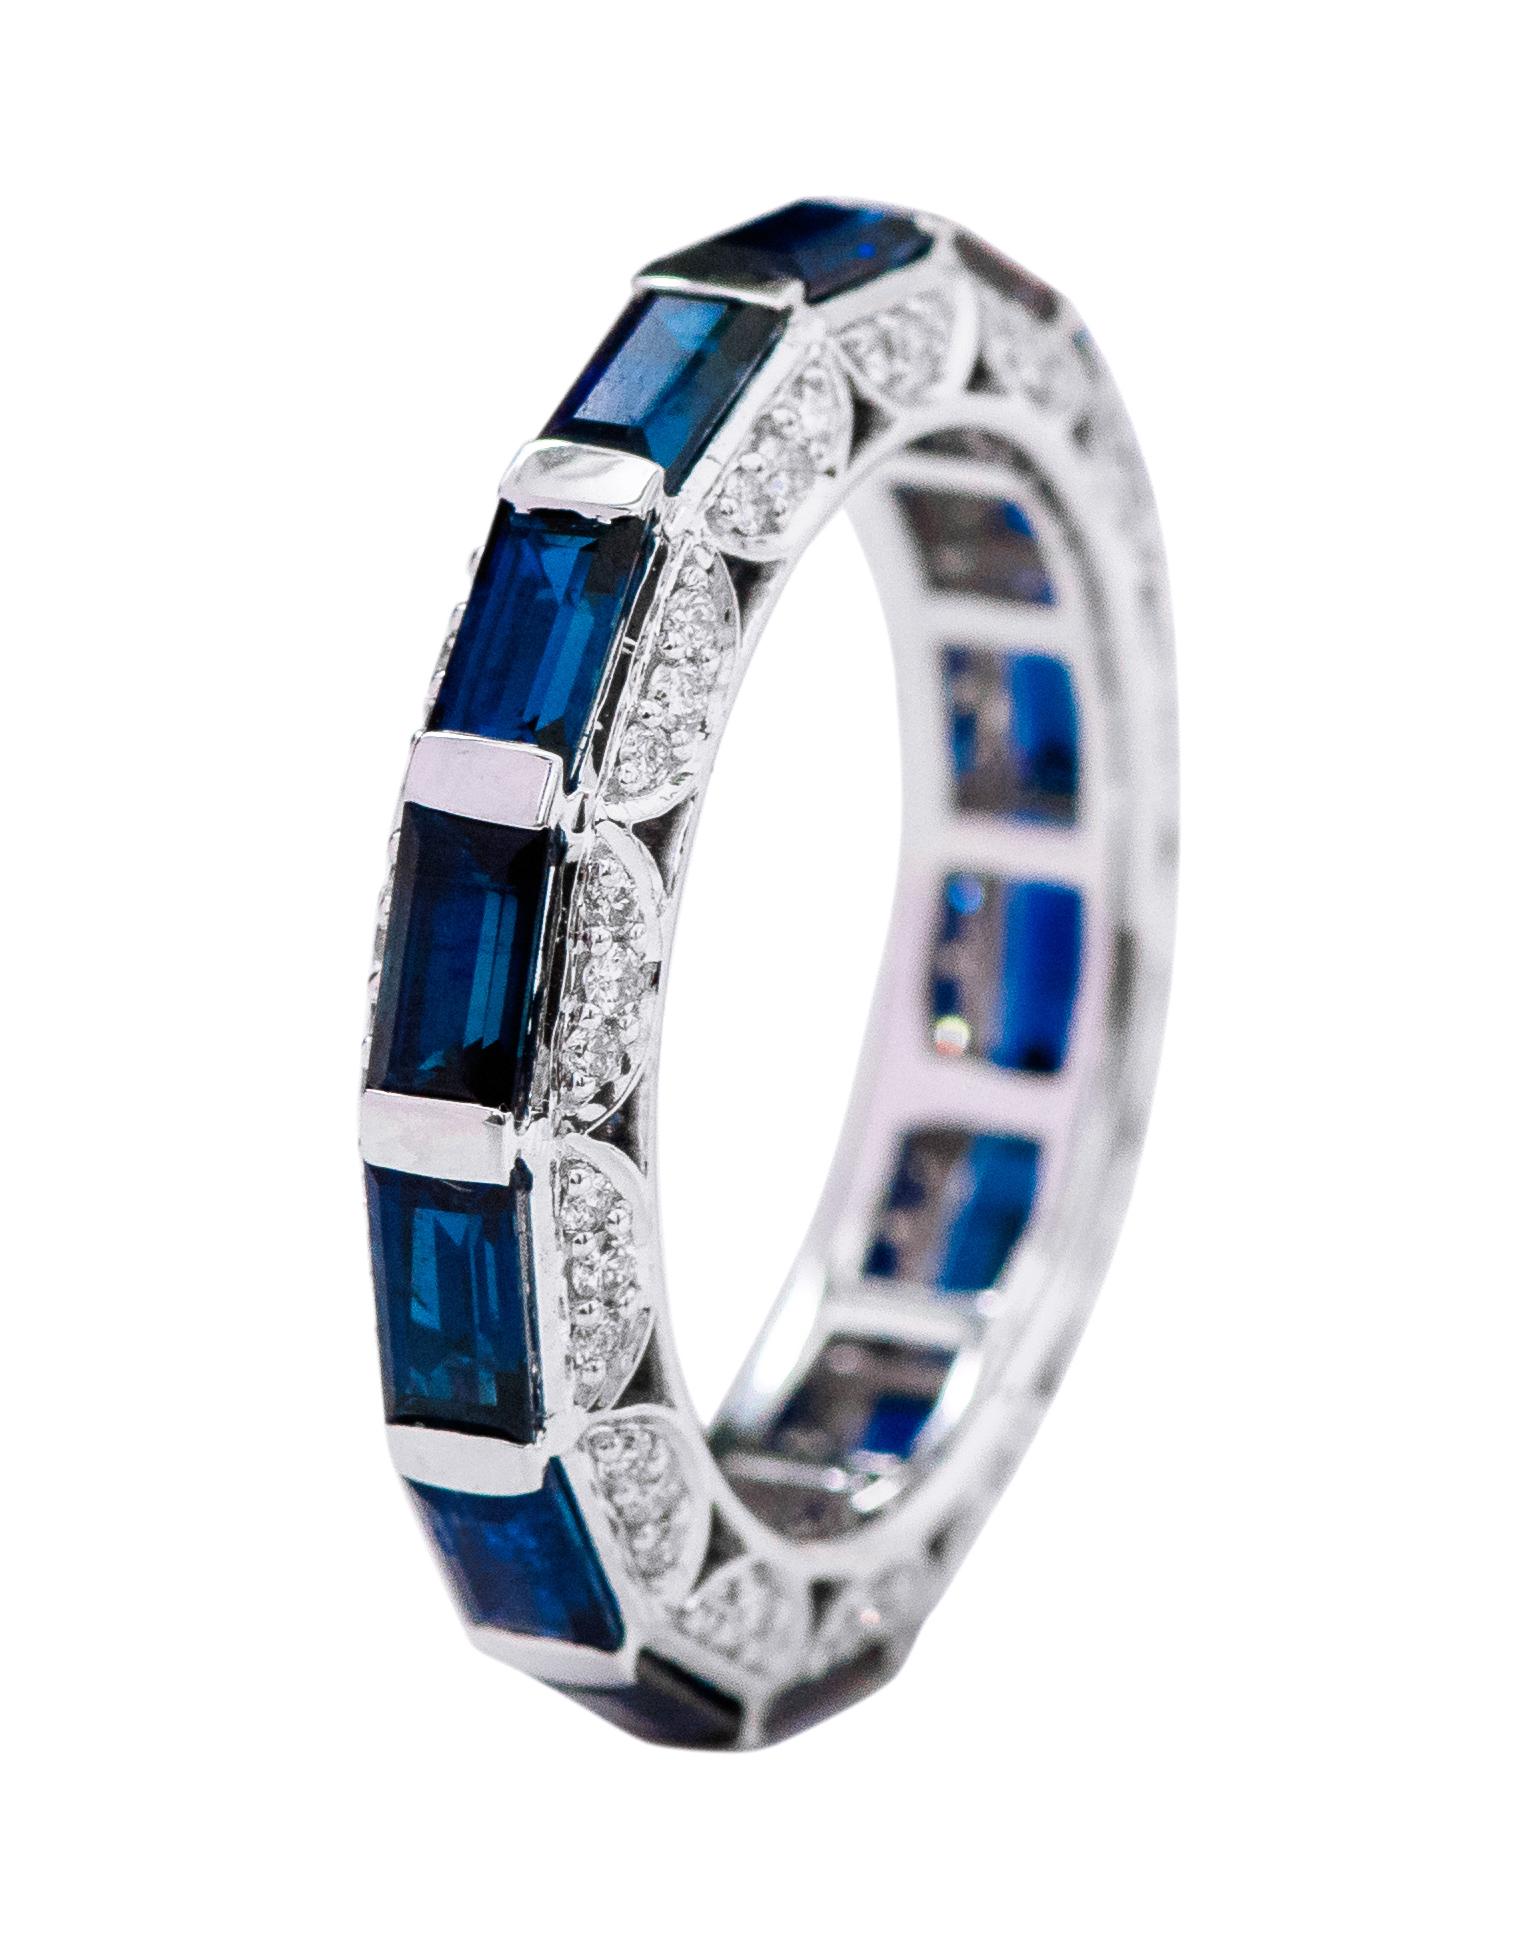 18 Karat White Gold 4.45 Carat Baguette-Cut Sapphire and Diamond Eternity Band Ring

This marvelous royal blue sapphire and side diamond band is alluring. The solitaire vertically placed baguette-emerald cut sapphires in half-bezel white gold